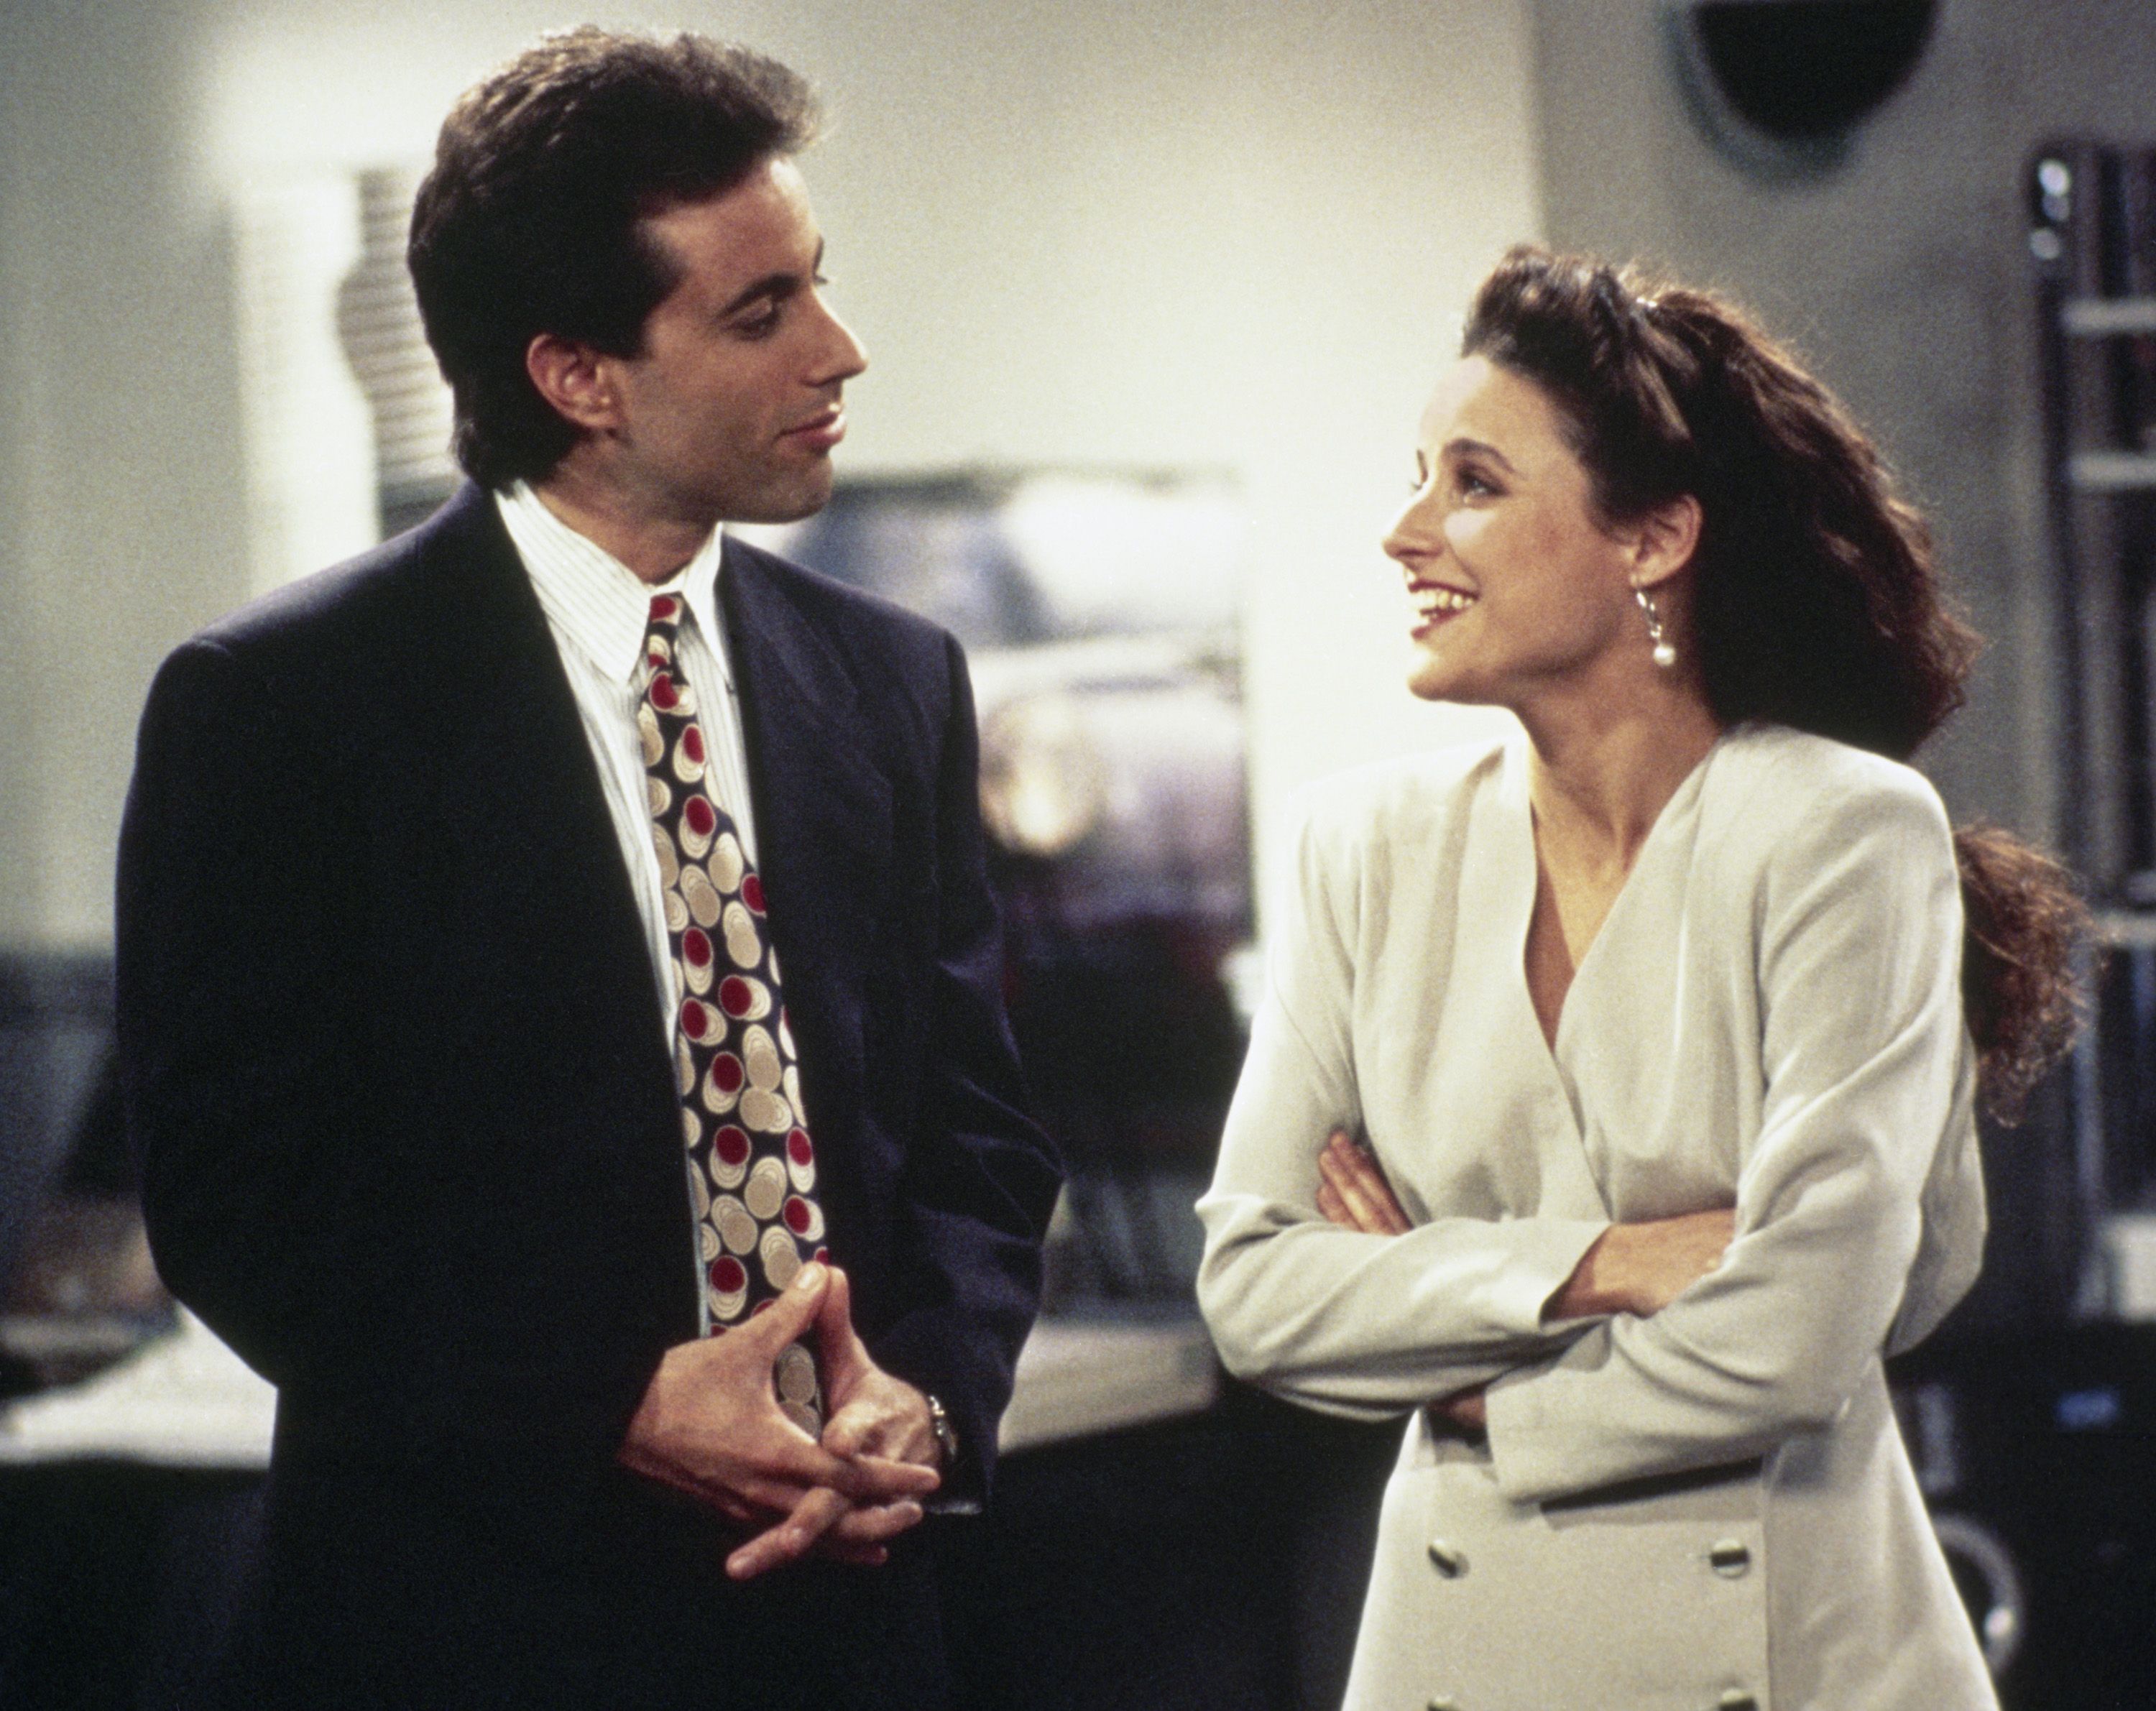 40 Behind-the-Scenes Photos from the Set of Seinfeld